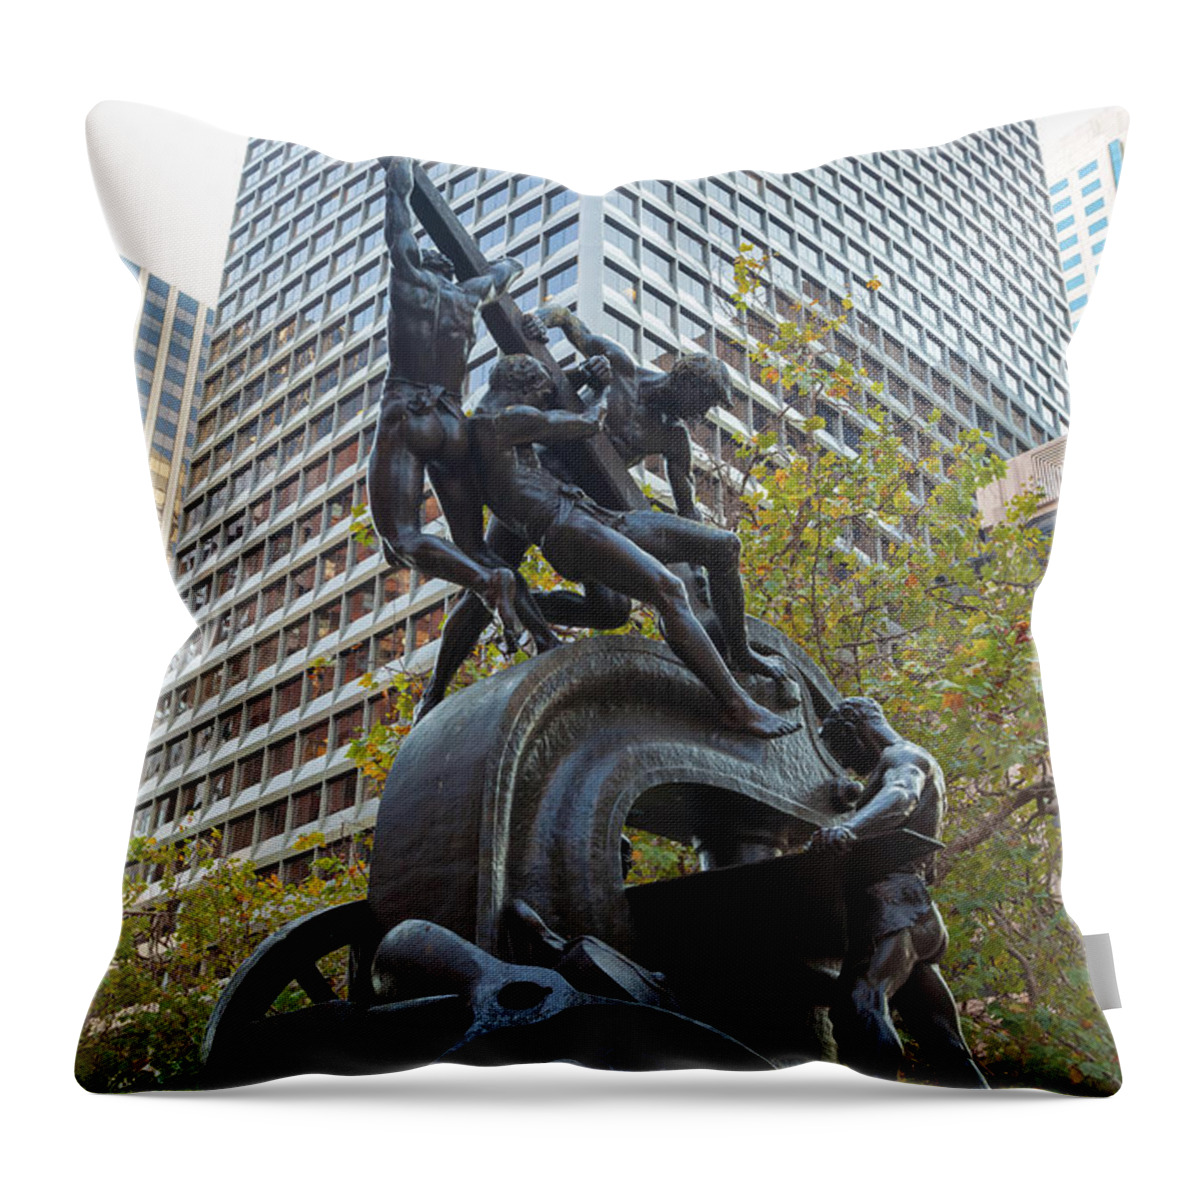 San Francisco Throw Pillow featuring the photograph The Mechanics by Jonathan Nguyen